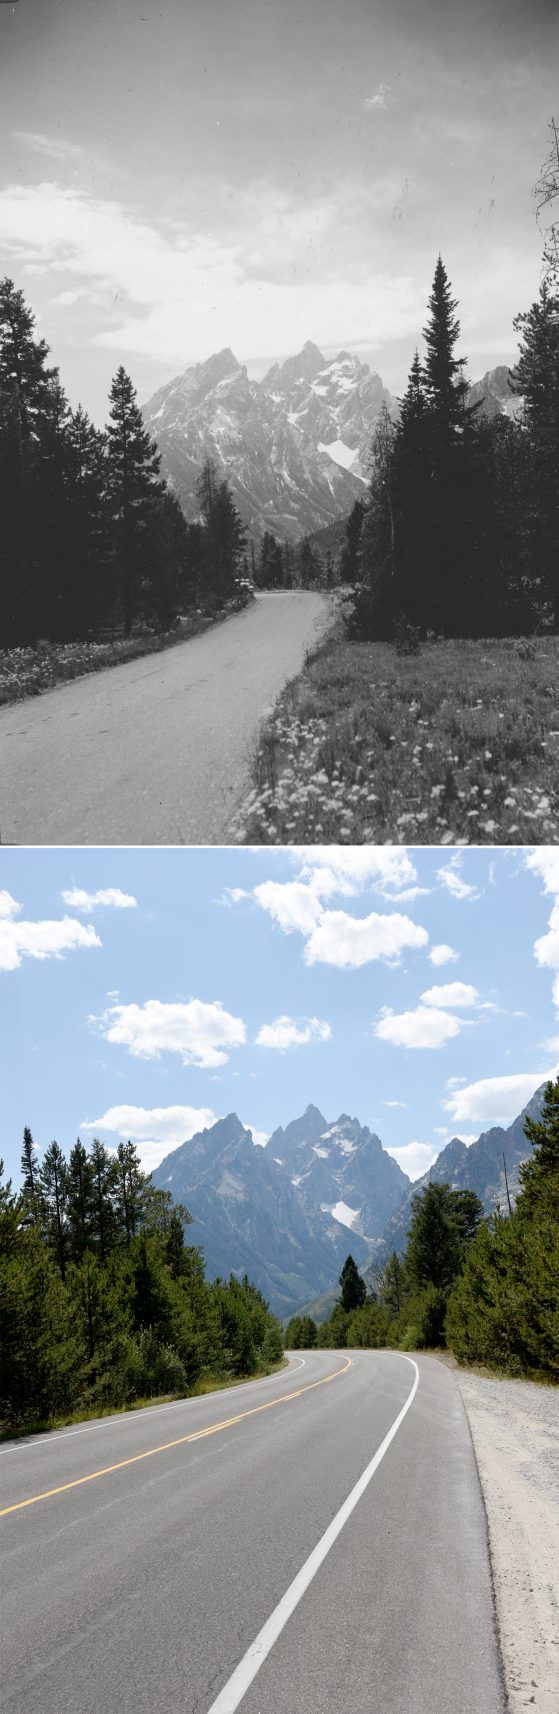 Two photographs. Top image black and white, bottom color. Road going from foreground to distance, trees both sides, Mountain peaks in distance.